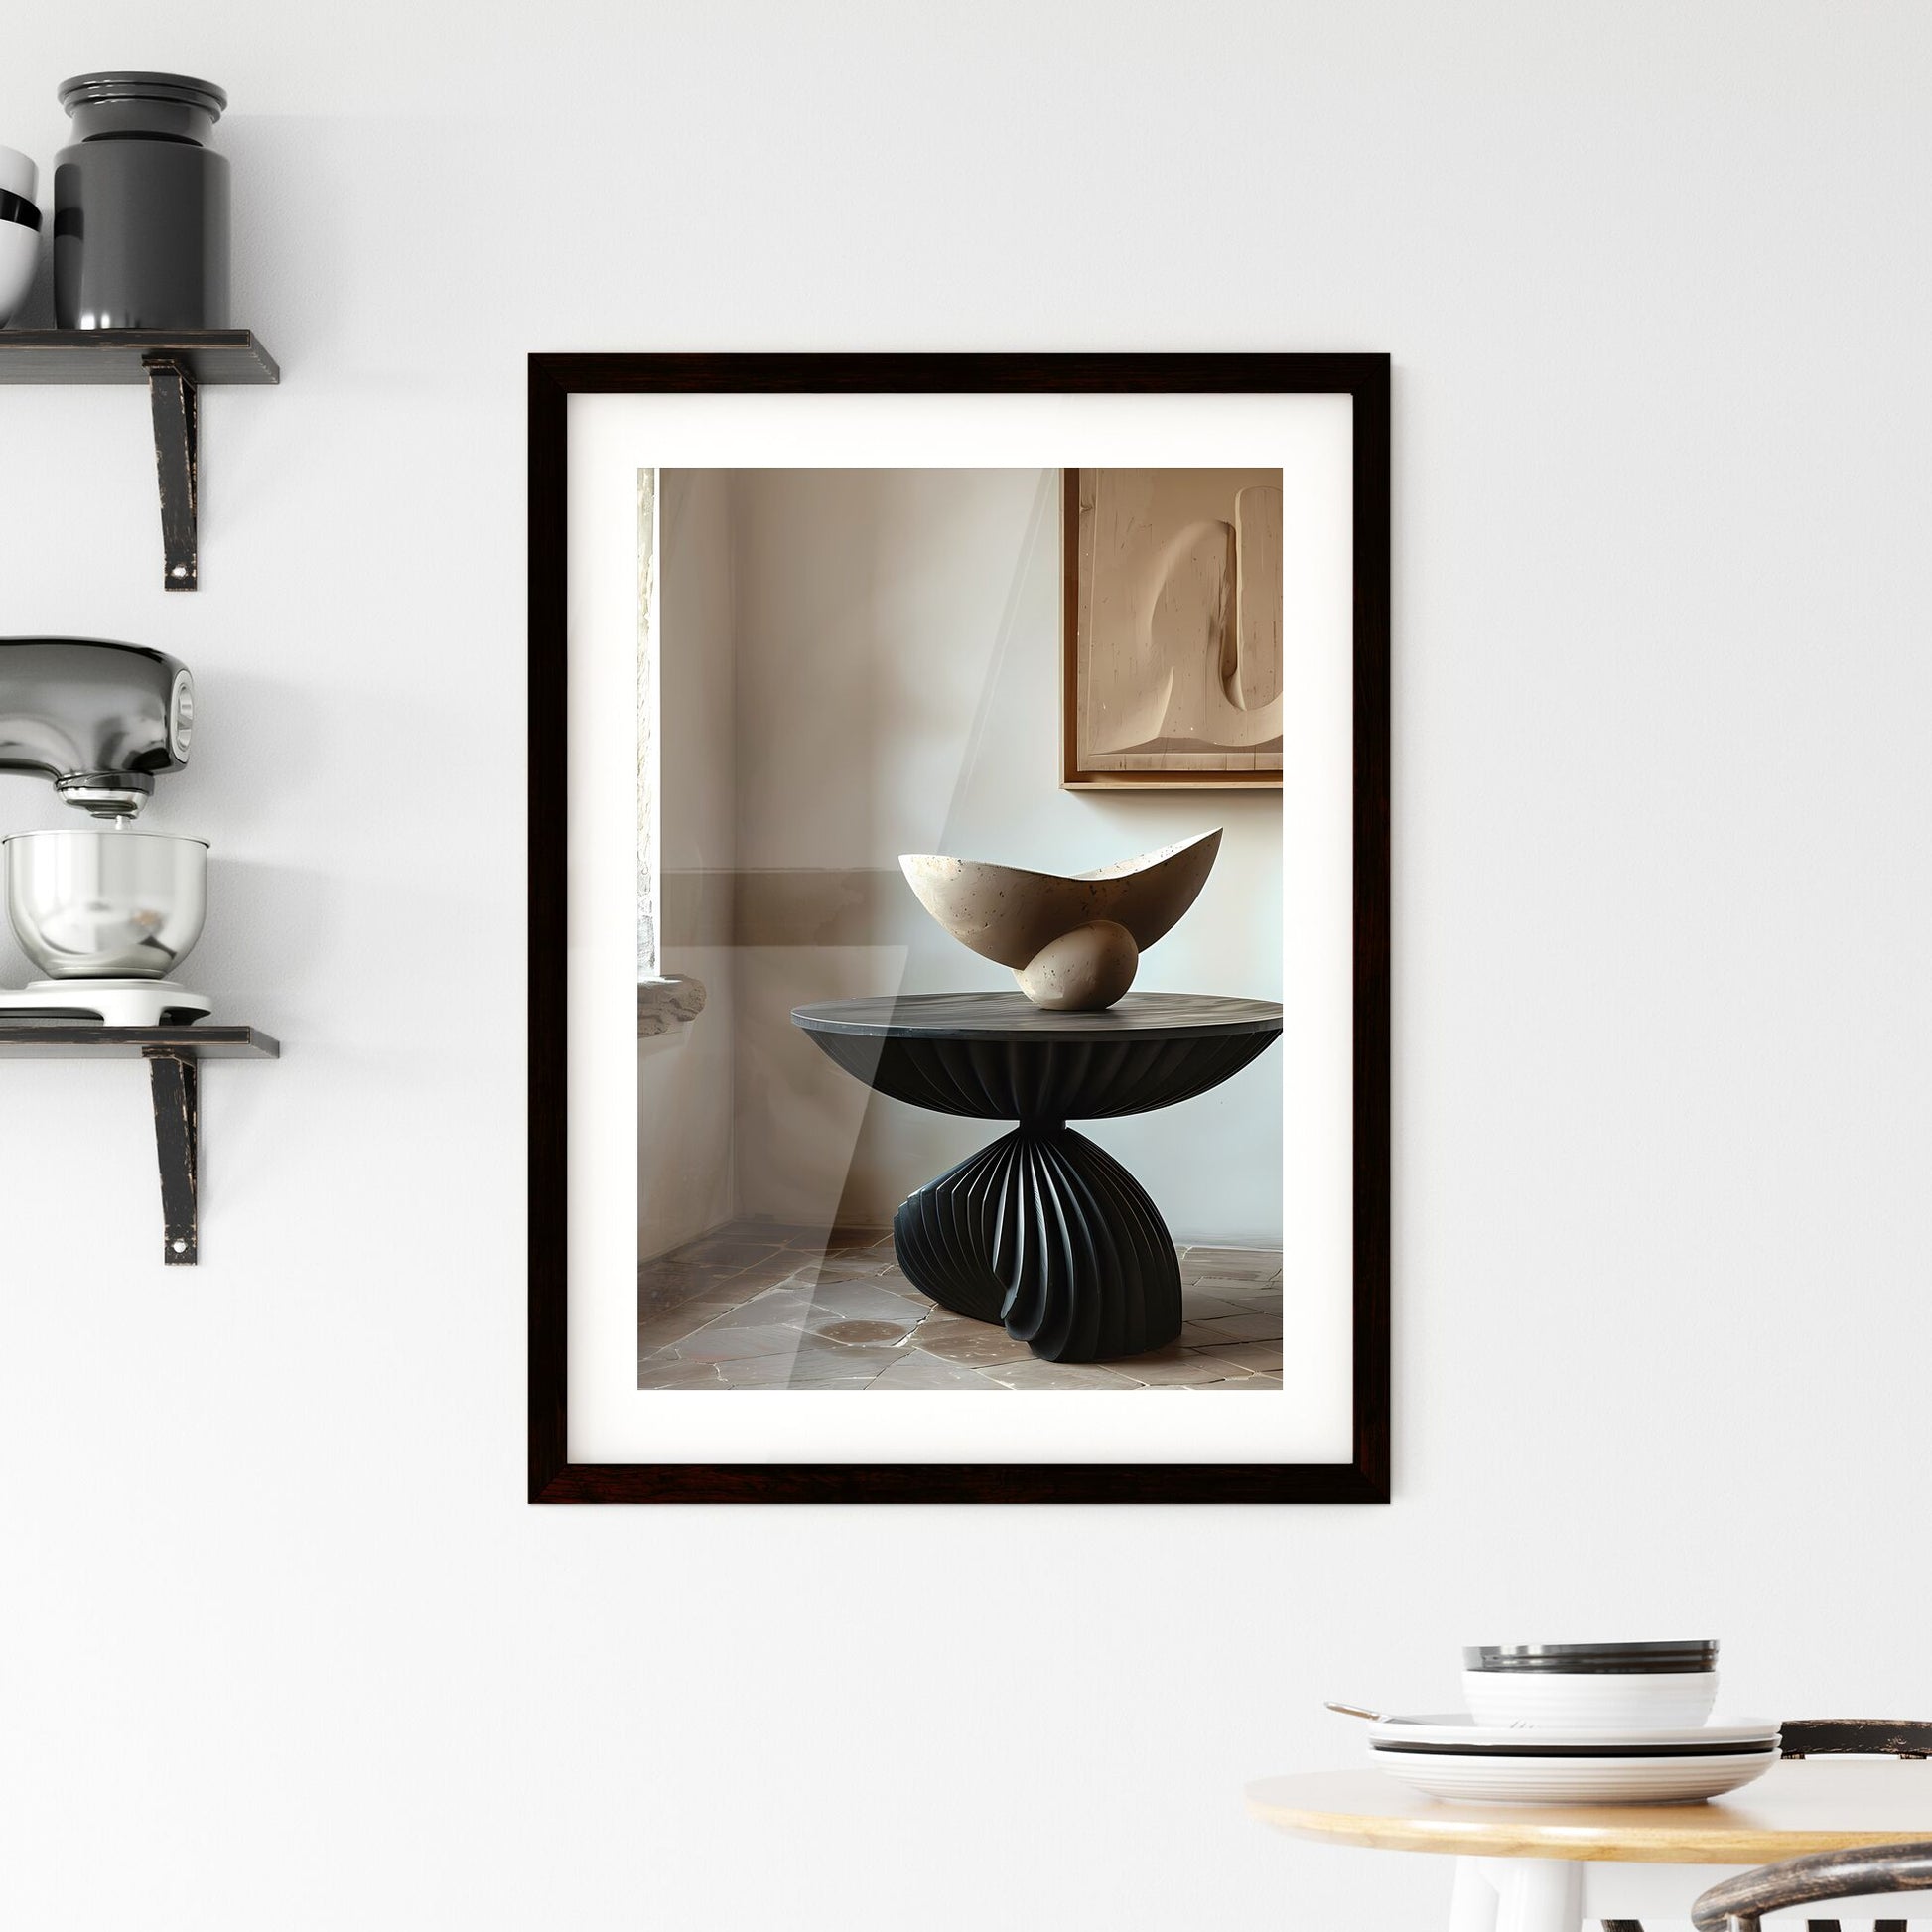 Minimalist Product Photography: Black Metal Nightstand with Fluted Legs and Abstract Marble Sculpture Default Title